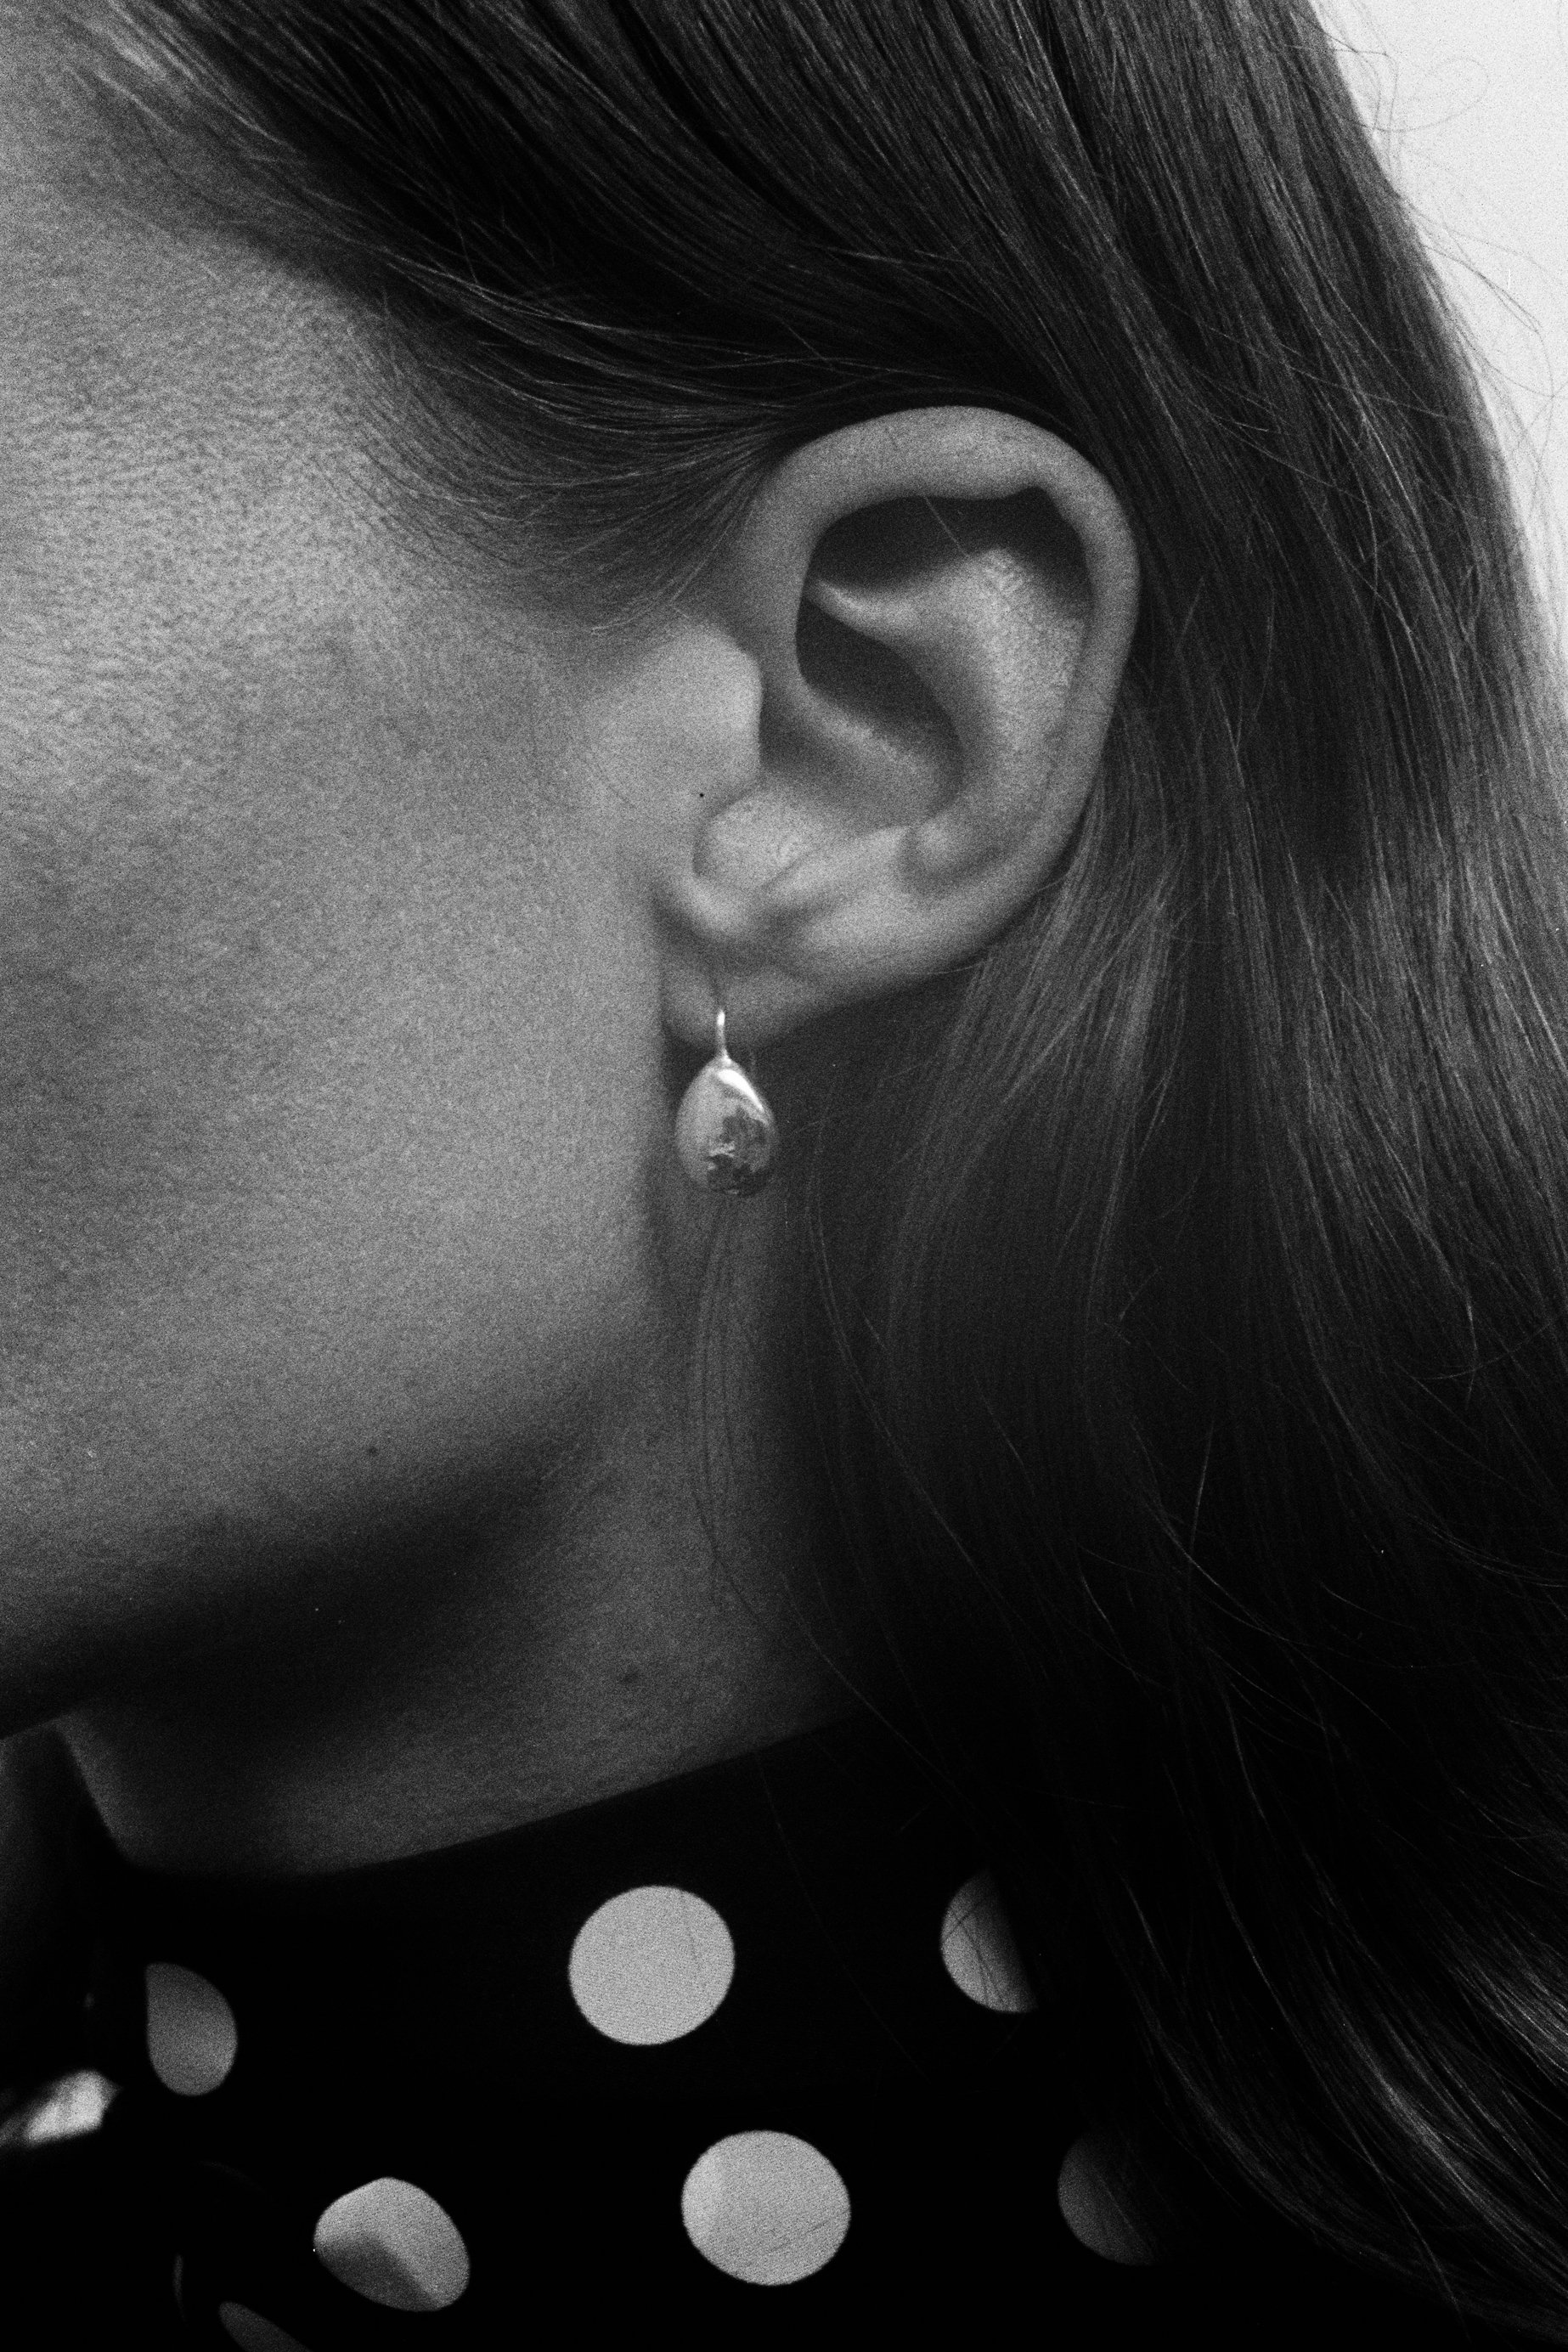 Image of Edition 4. Piece 2. Earrings 